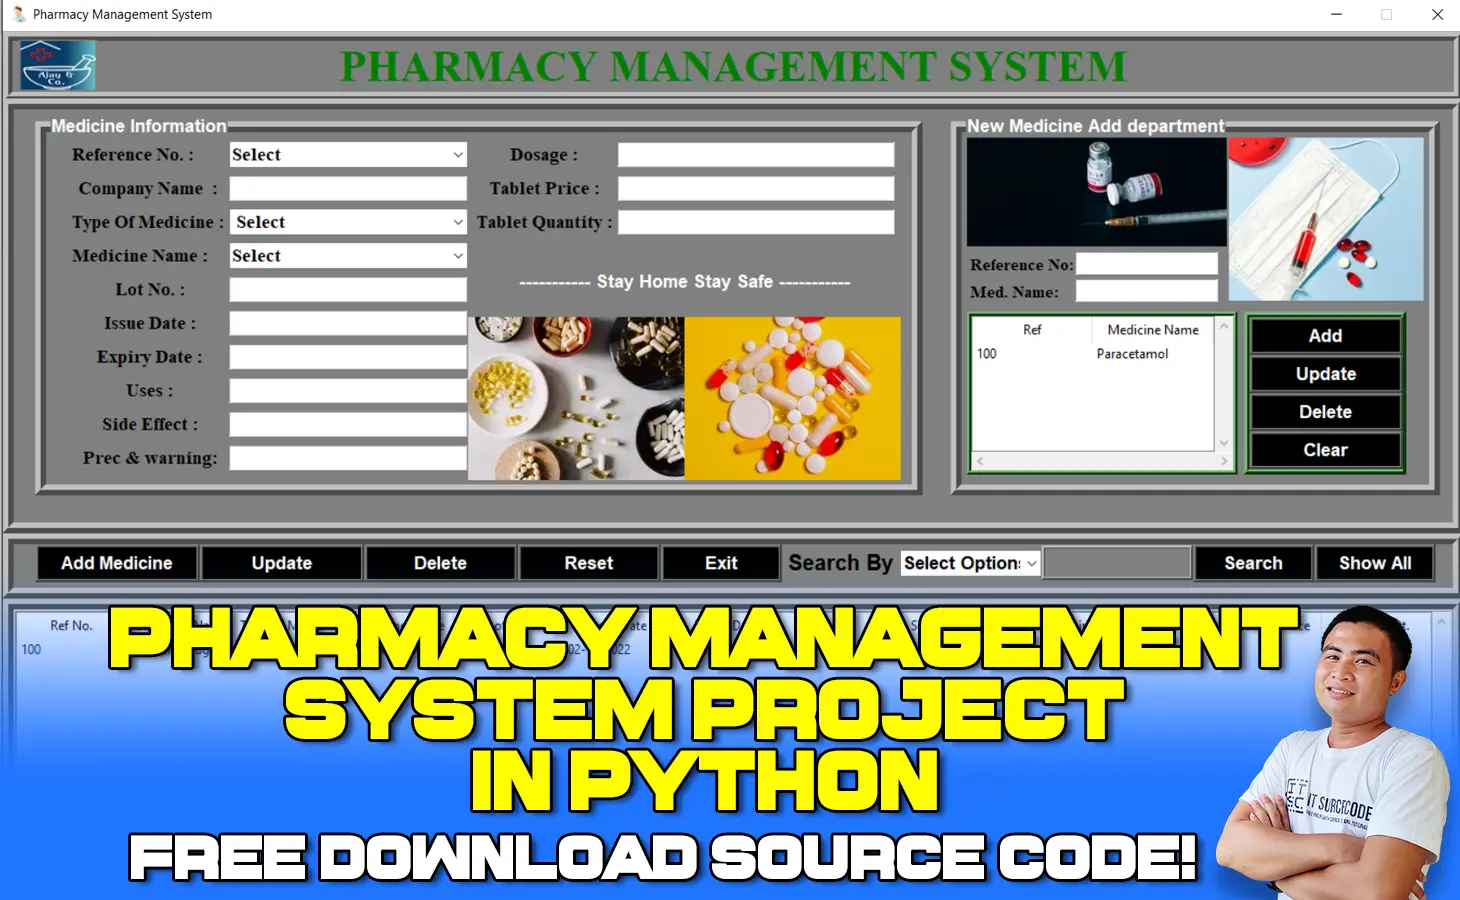 Pharmacy Management System Project in Python with Source Code